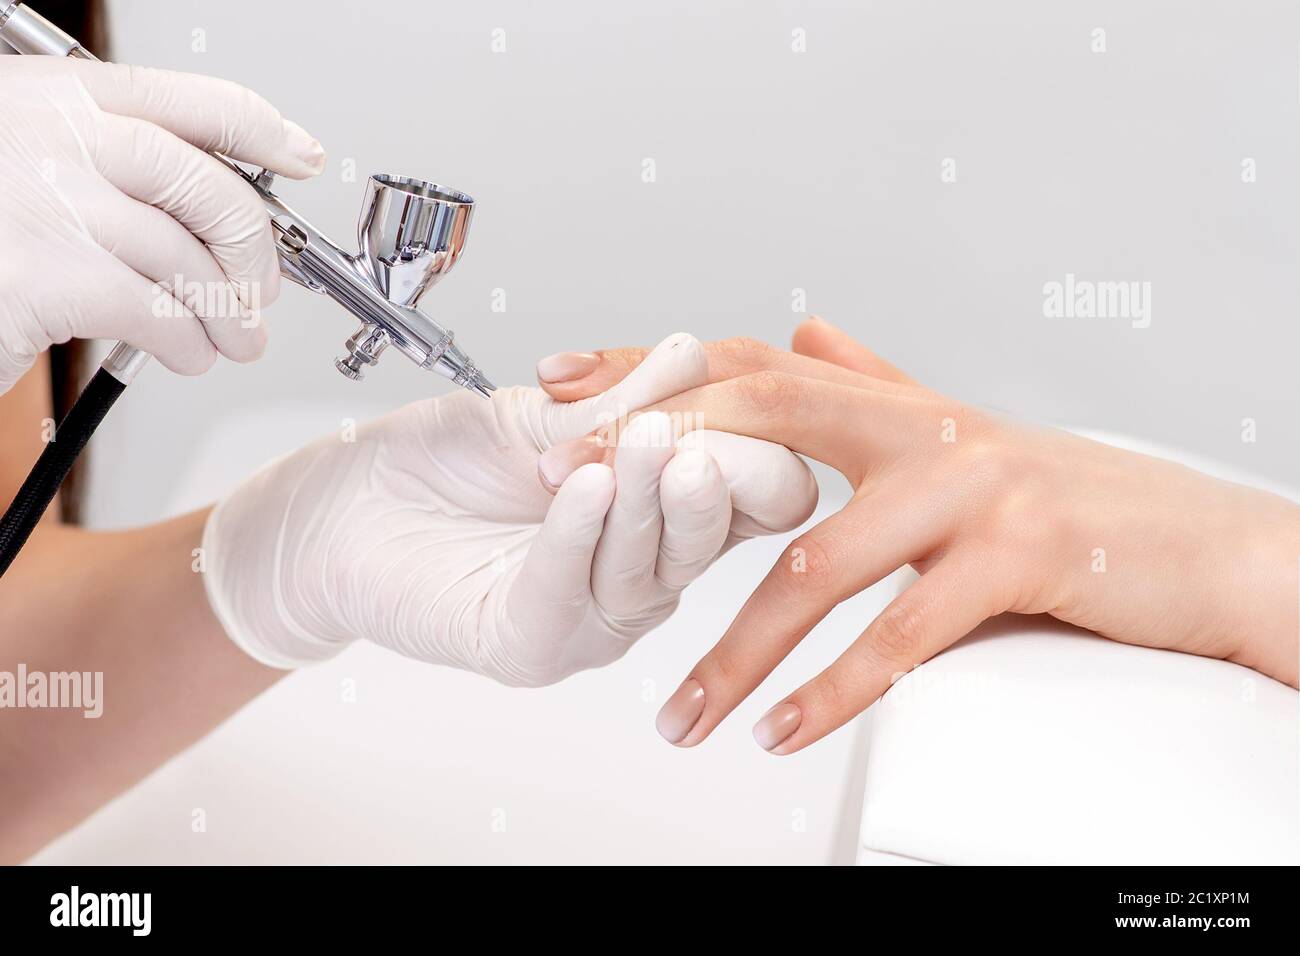 Manicure Master Is Painting Finger Nails In Beige Color Using Airbrush Woman Getting Fingernail Manicure Stock Photo Alamy,Average Life Of A Cat Uk